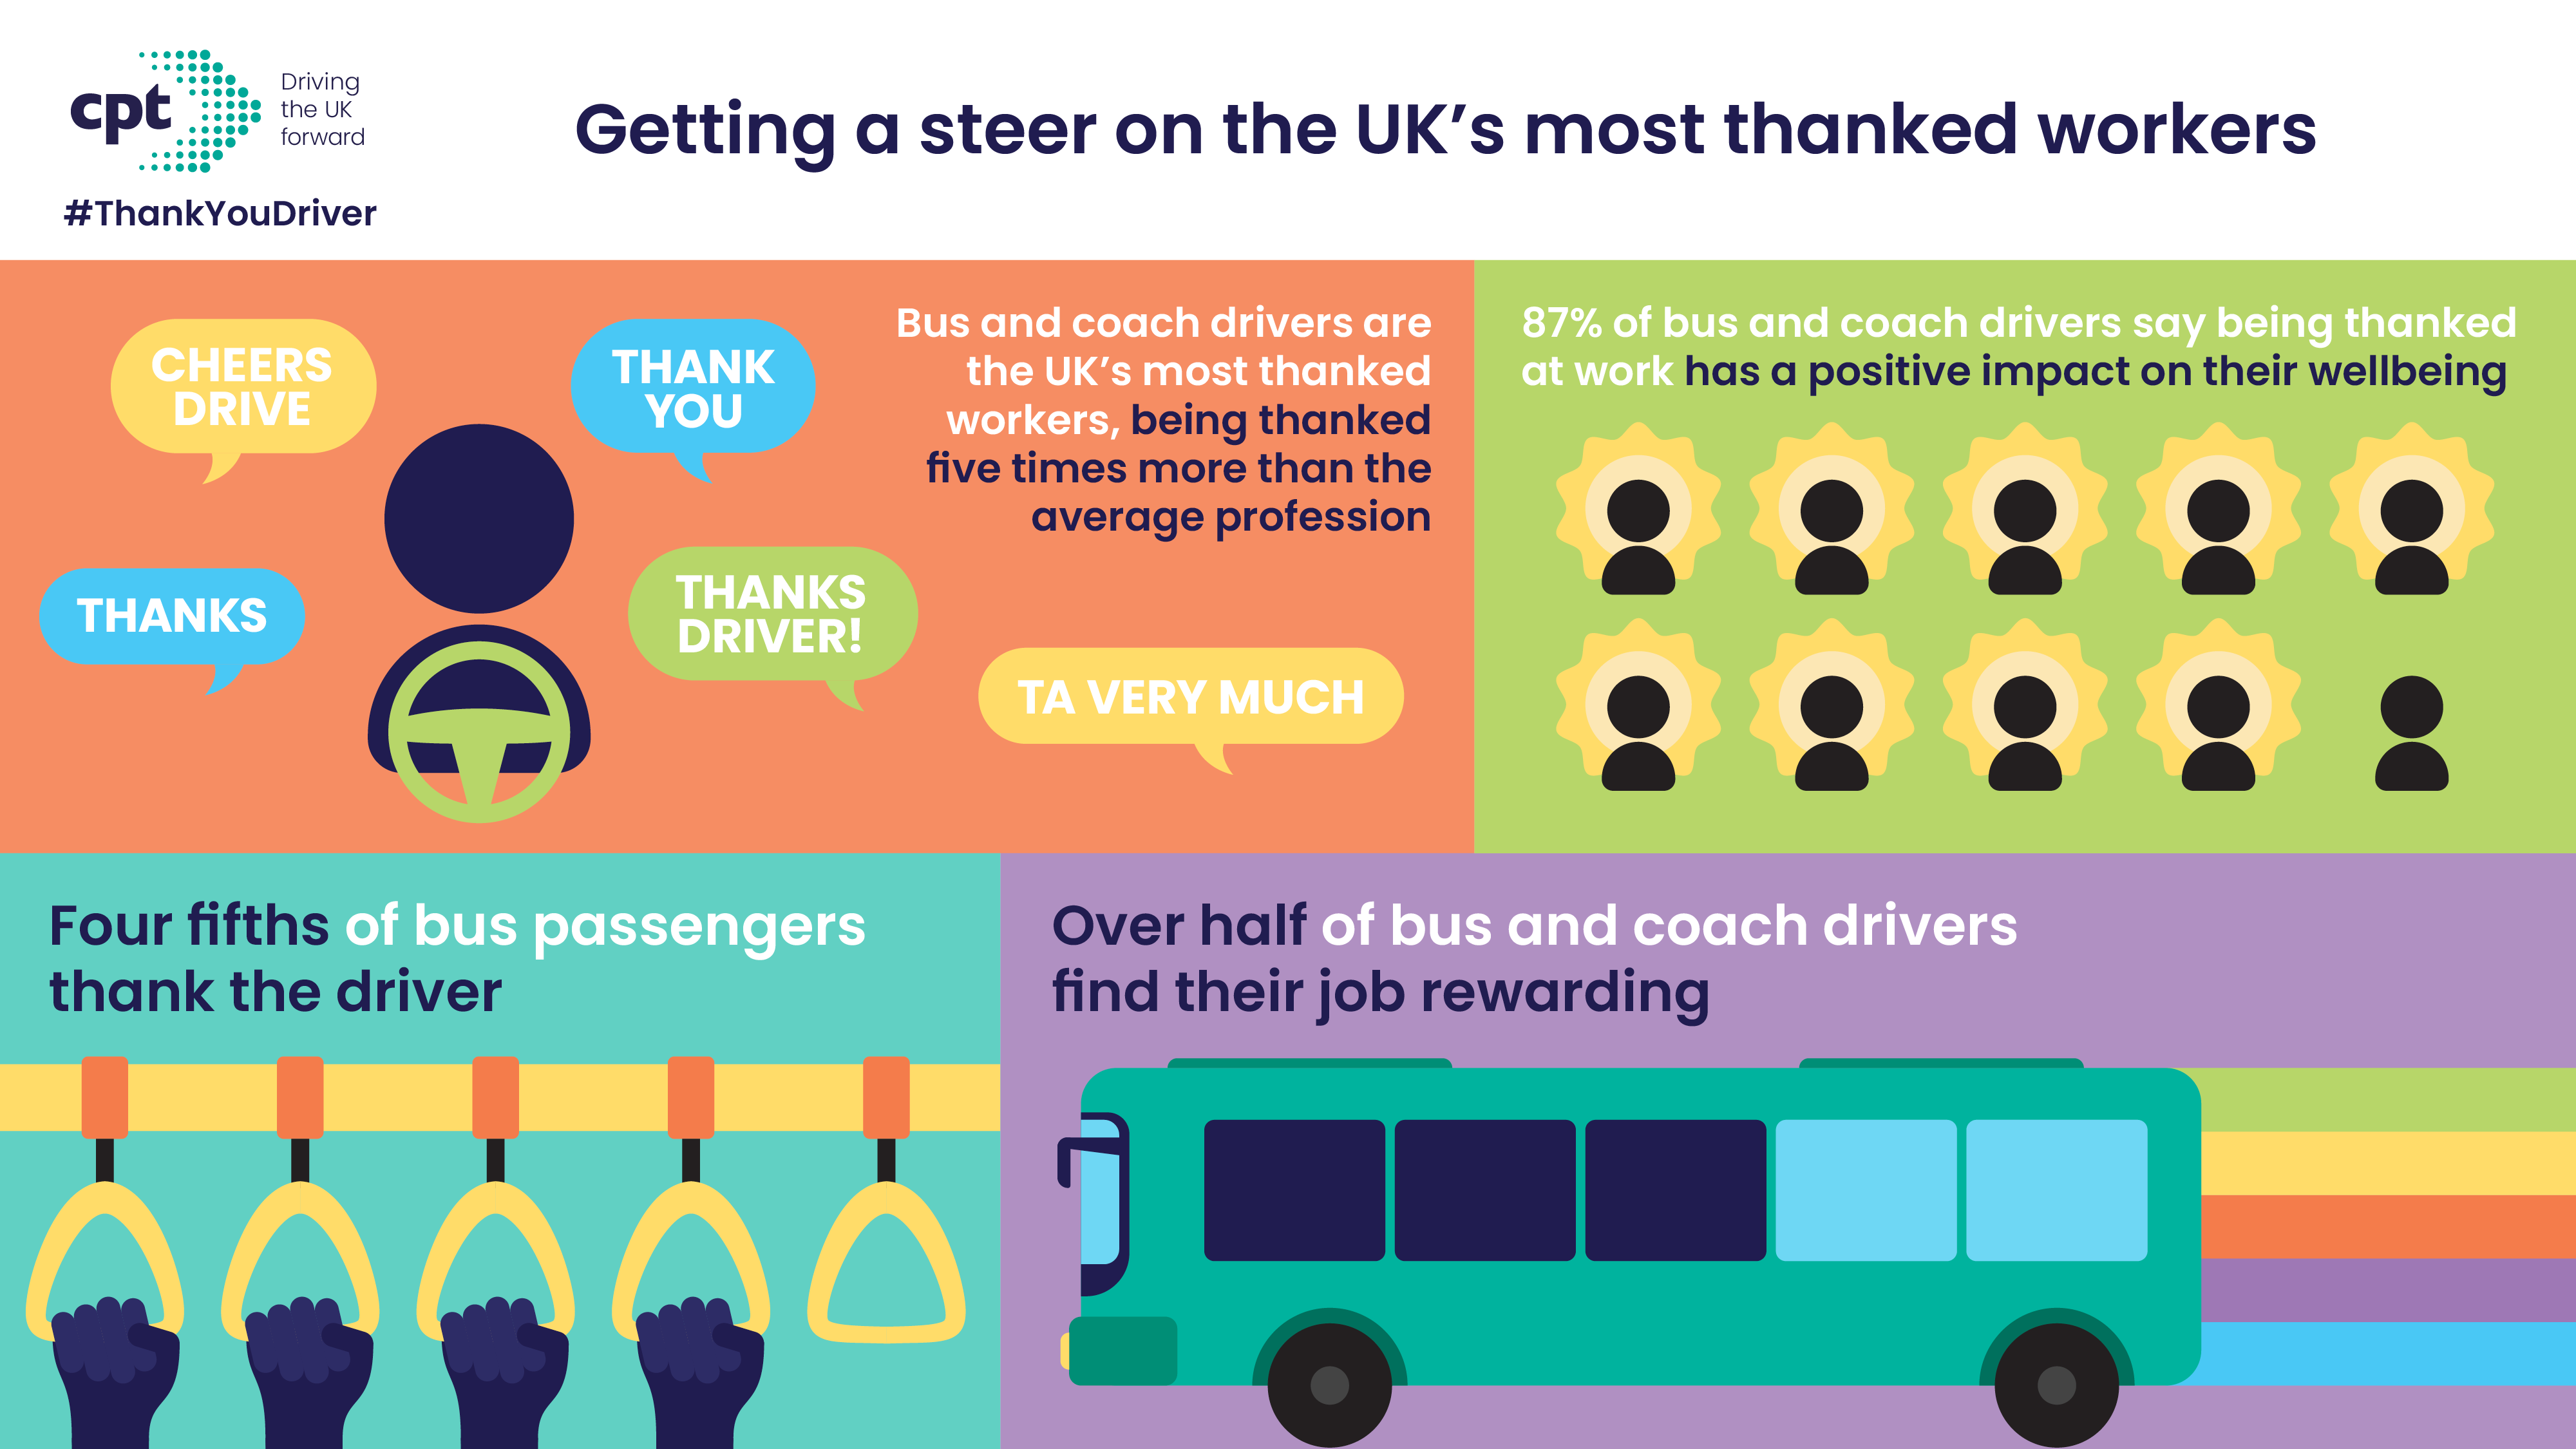 Drivers are UK’s most thanked workers – CPT research